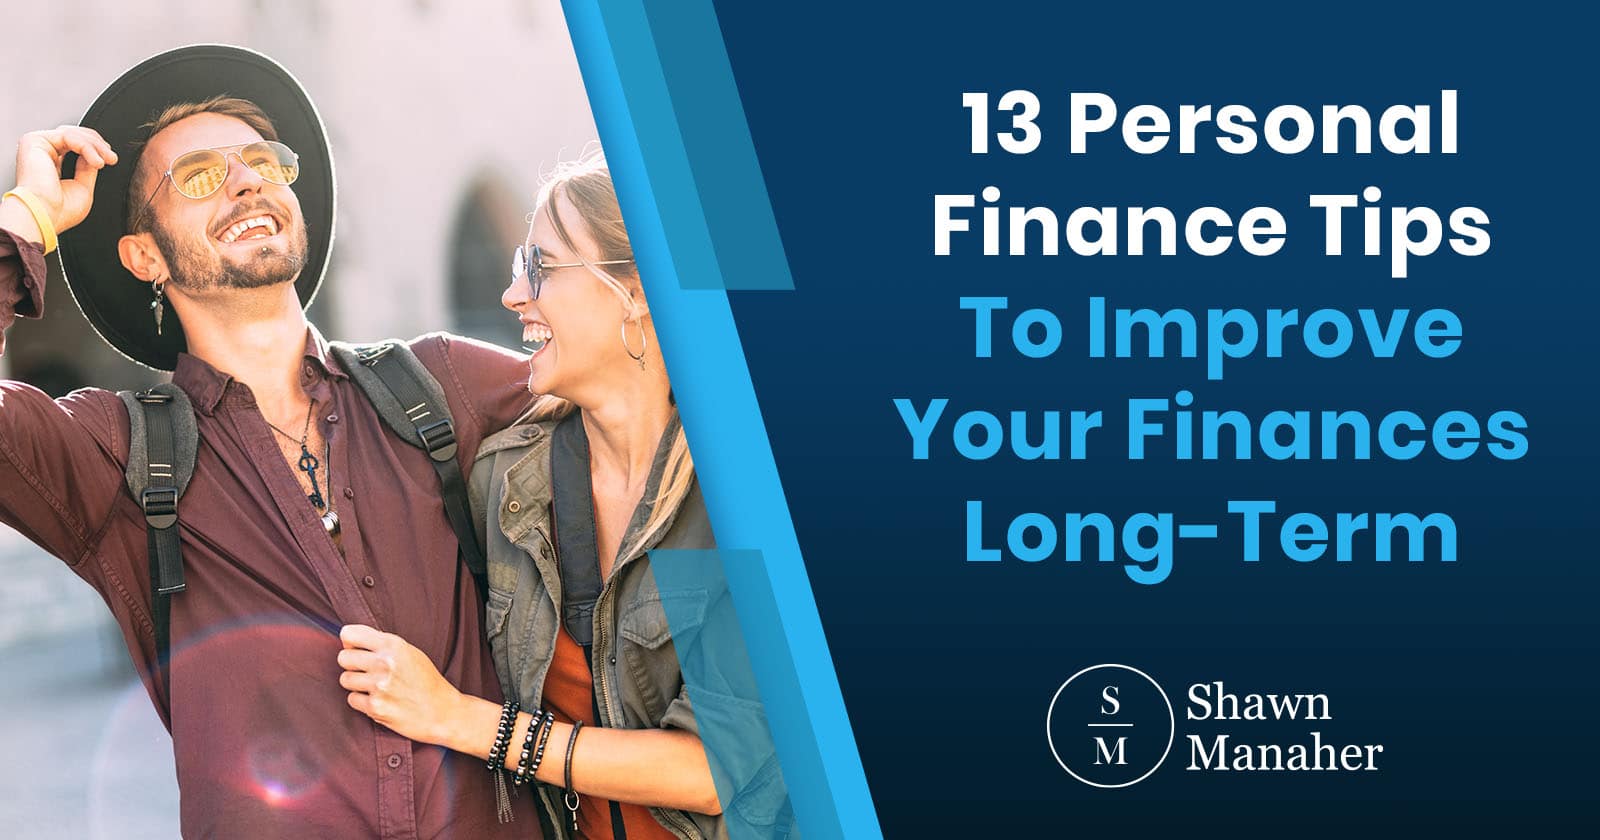 13 Personal Finance Tips To Improve Your Finances Long-Term